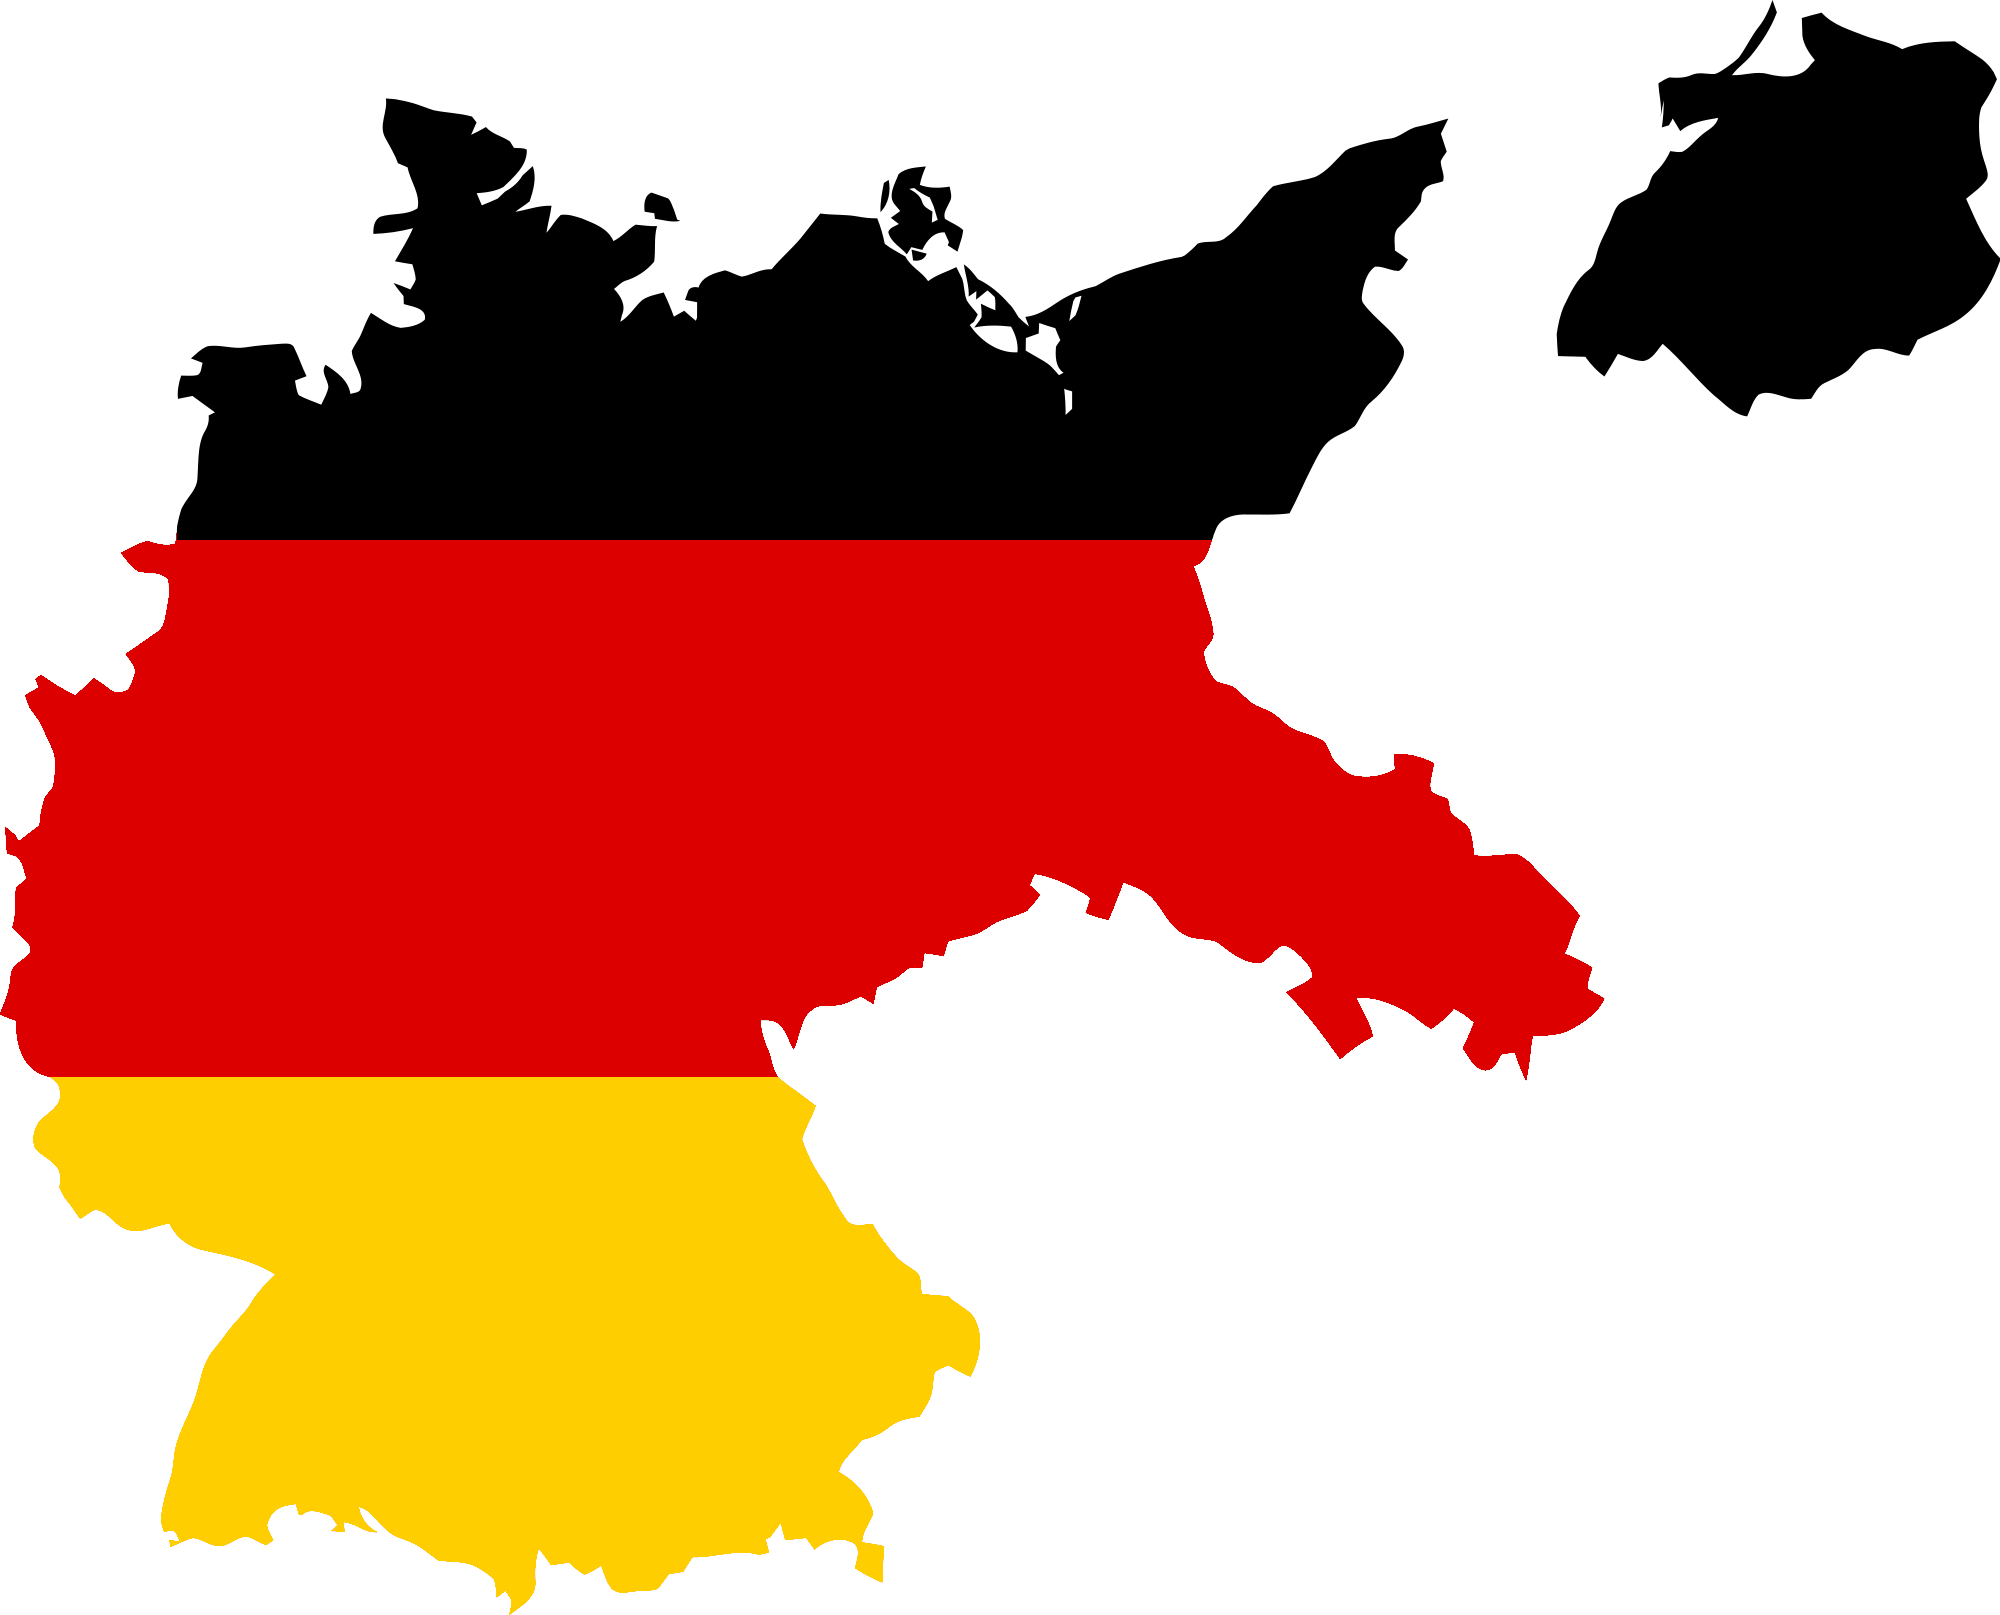 297 × 240 Pixels - Germany Map With Flag (2000x1615)